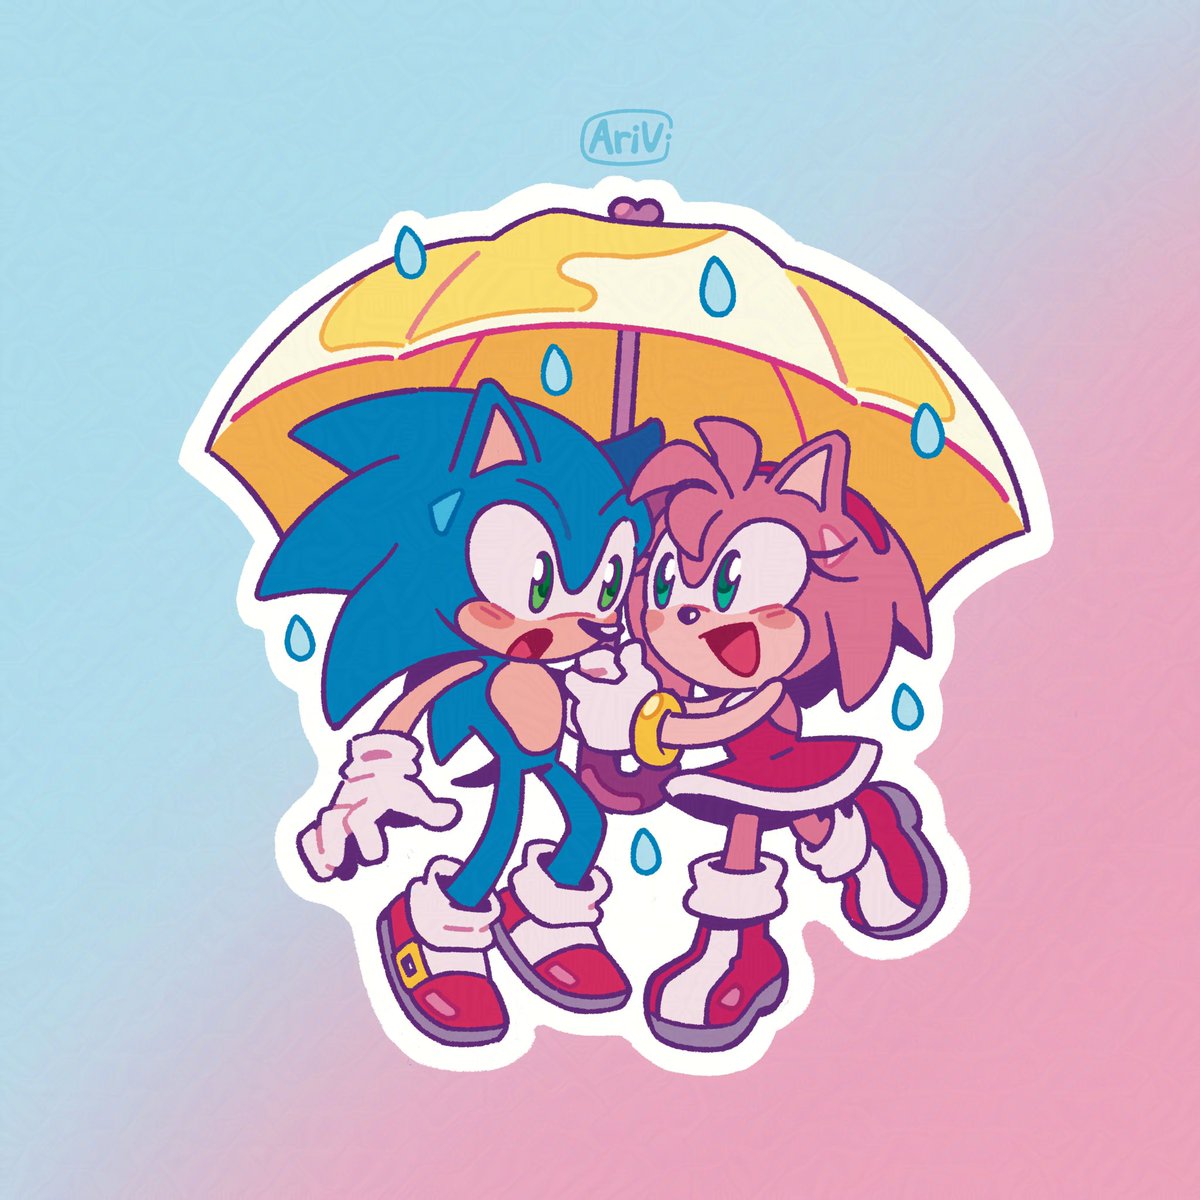 Sonic vinyl stickers are being made 😎✨ might make these into charms too?? We’ll see lol